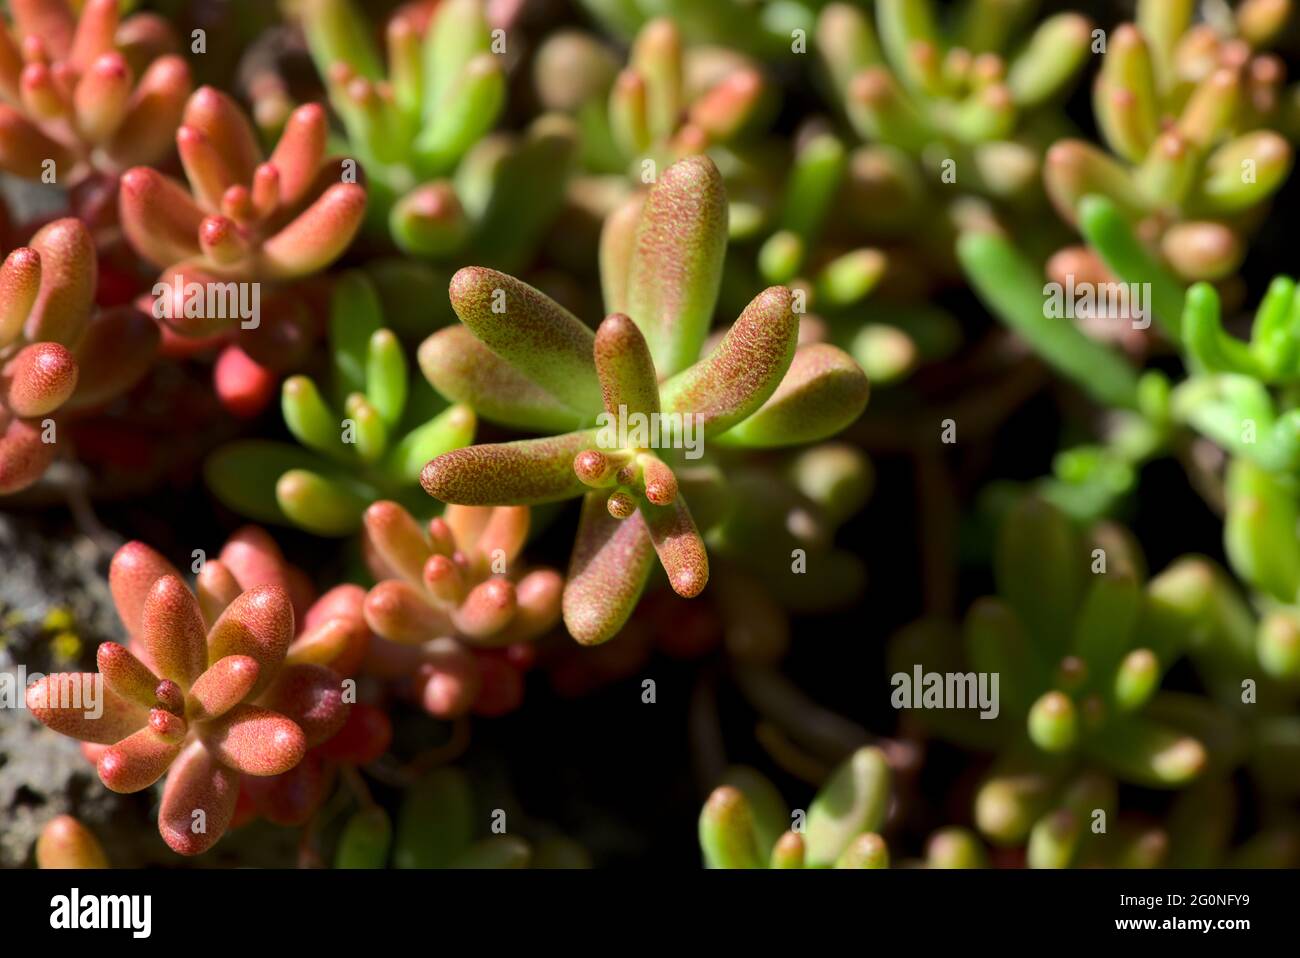 shoots of Sedum album 'Coral Carpet', also known as White Stonecrop, in close-up Stock Photo